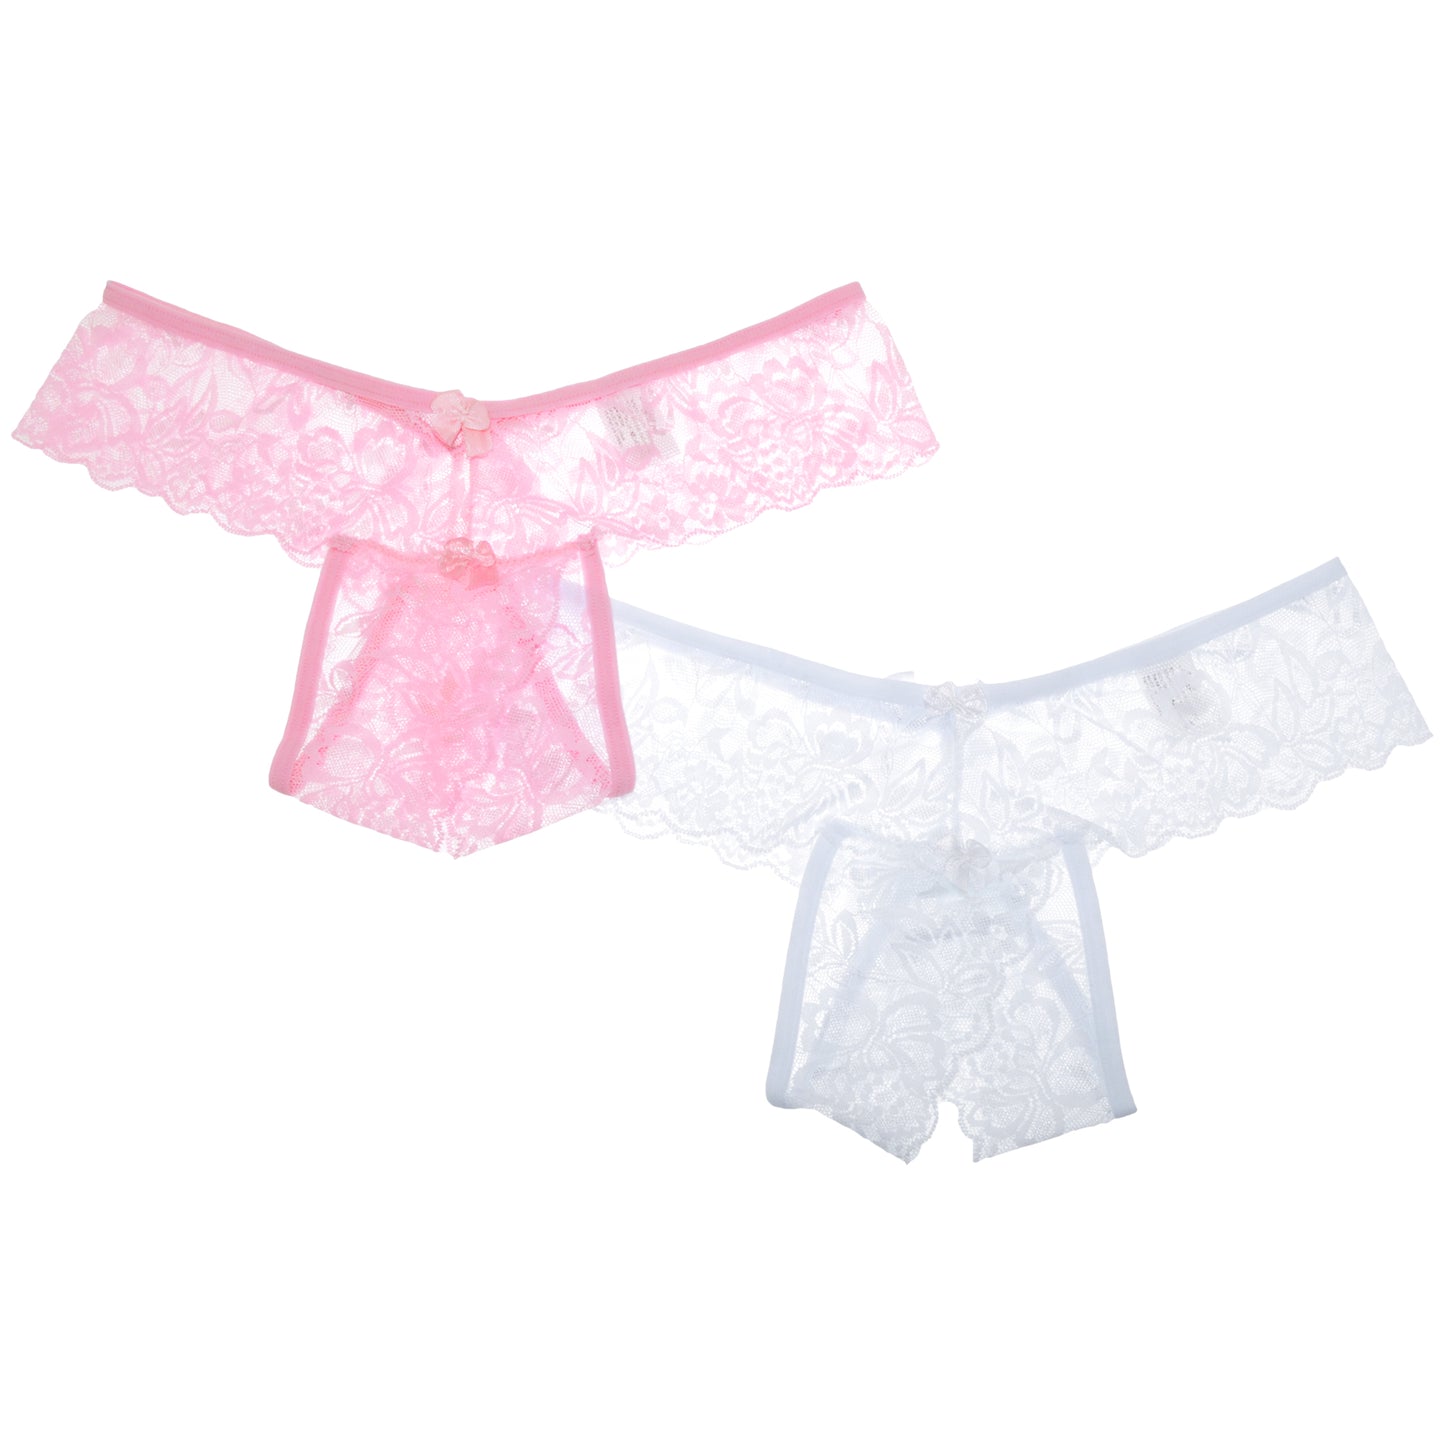 Angelina Open-Crotch Lace Thongs (2-Pack), #G3251